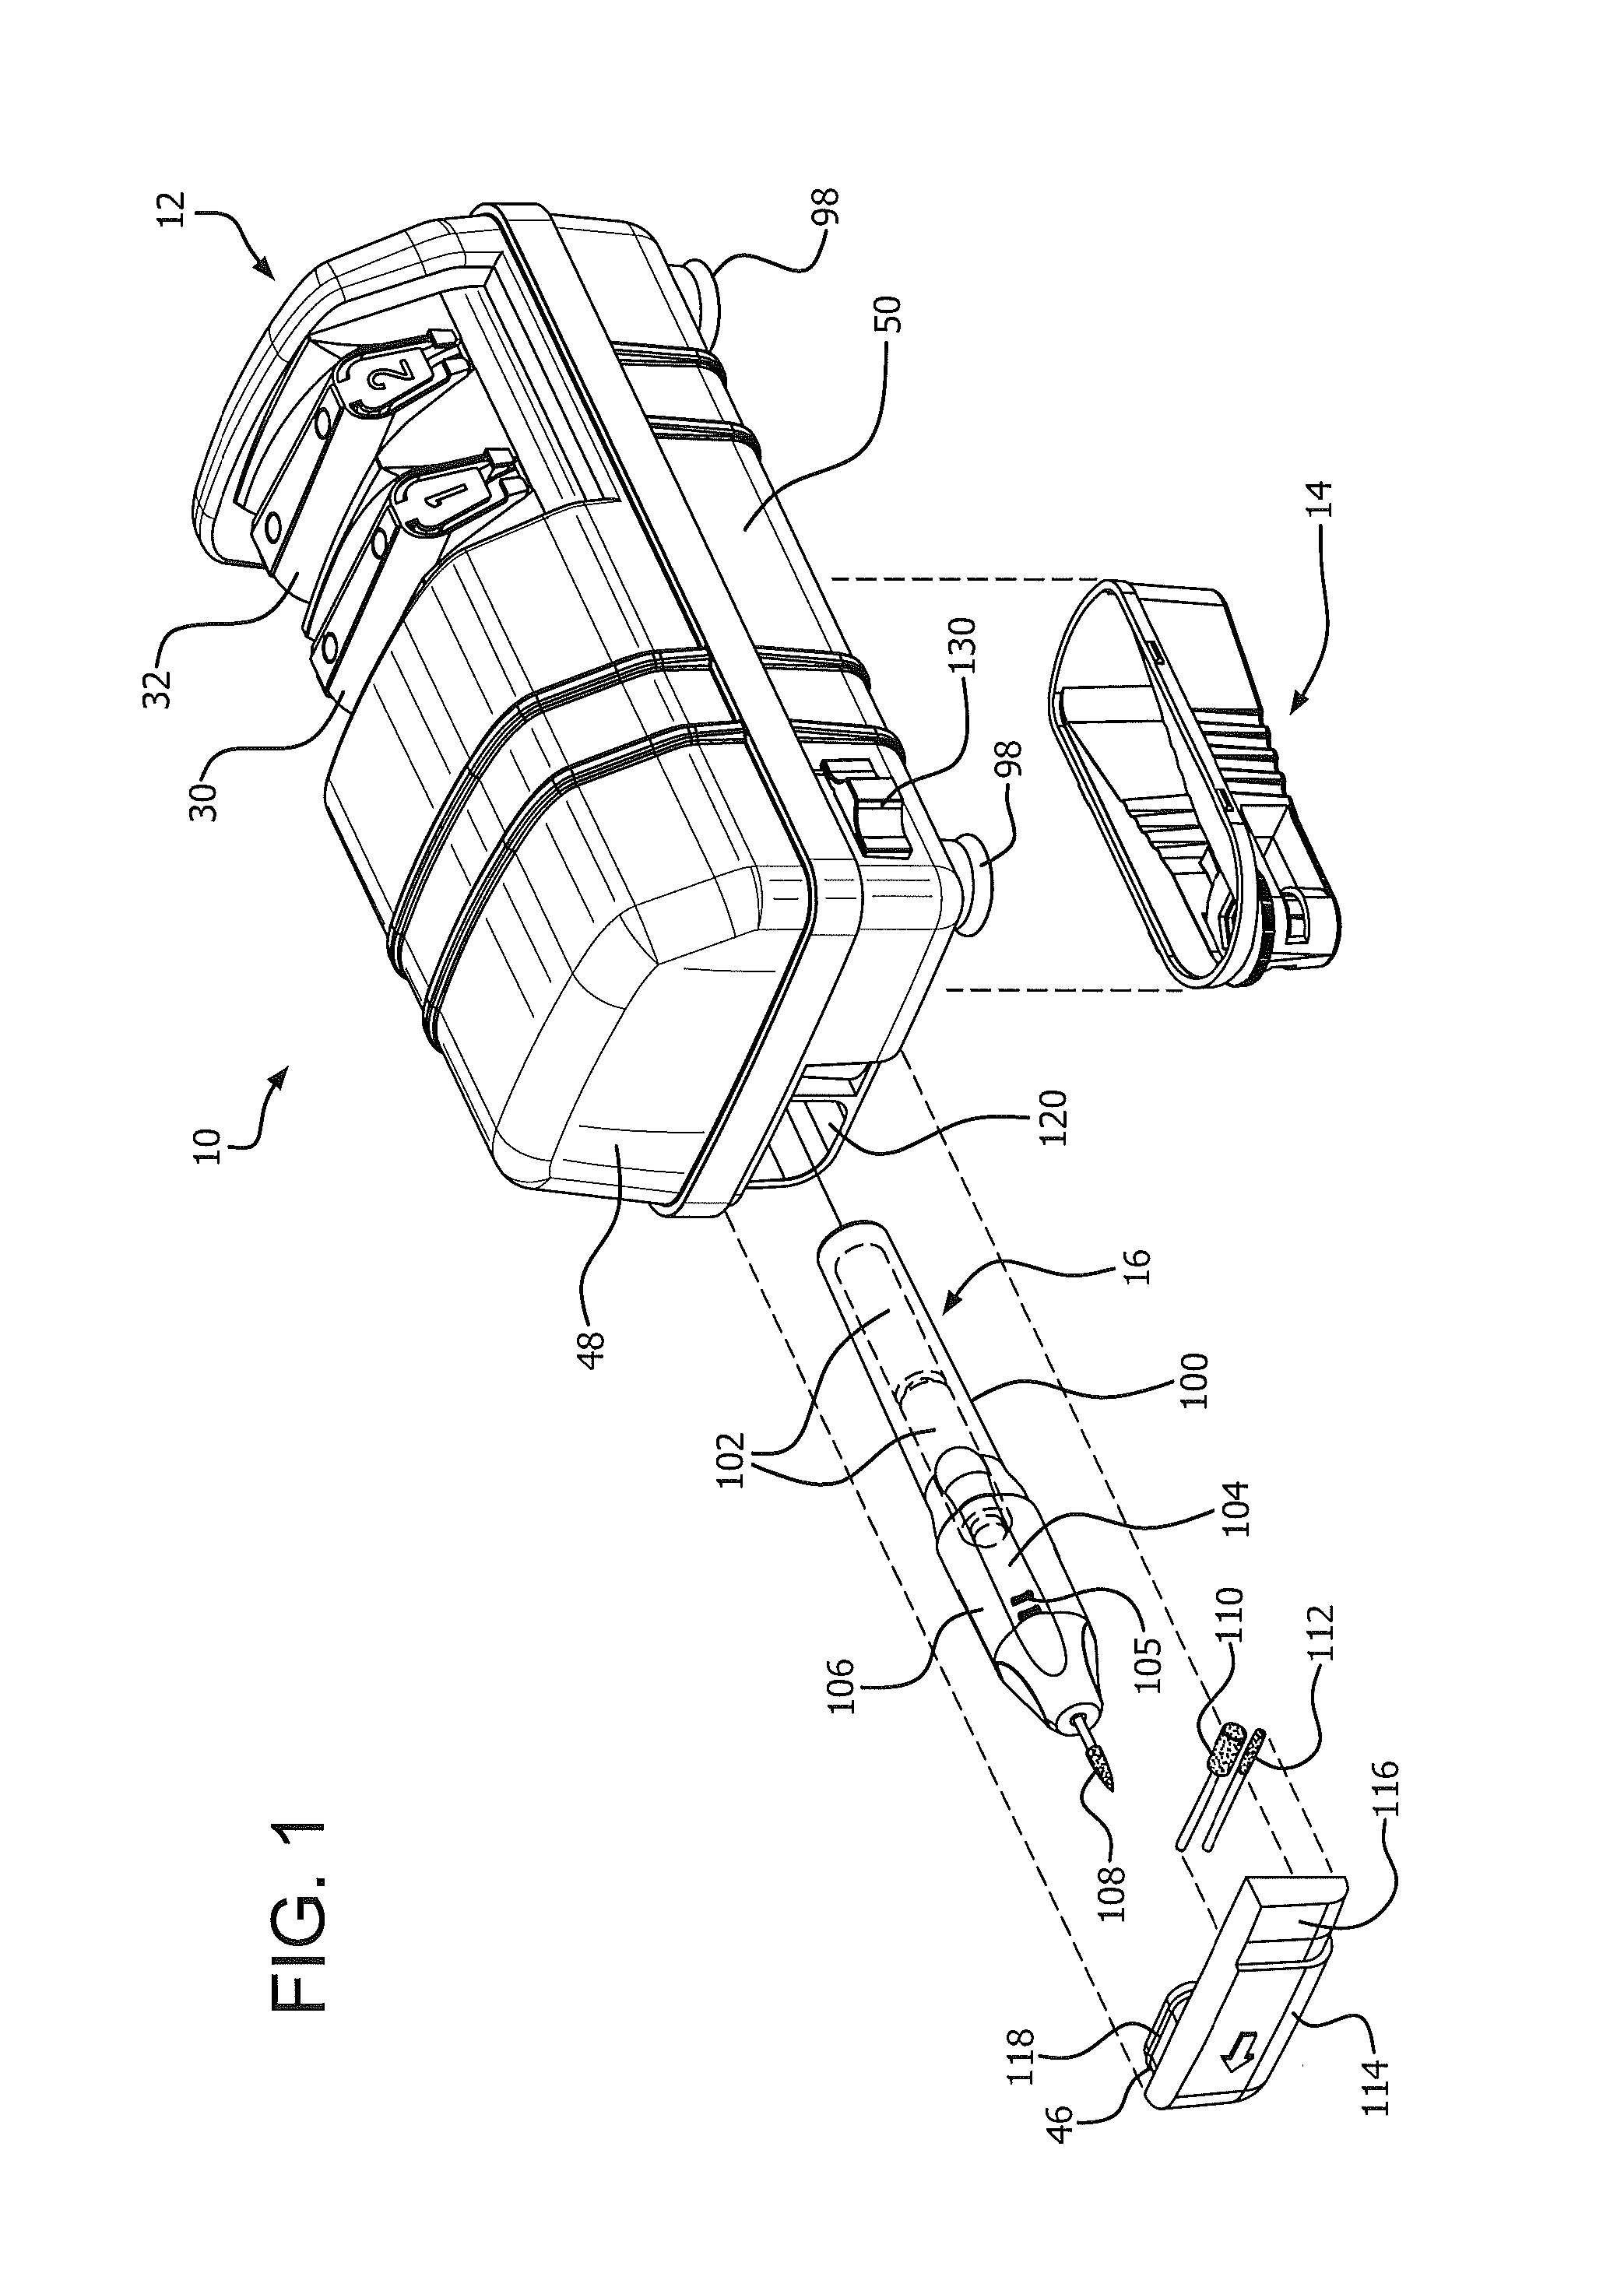 Combination sharpener assembly